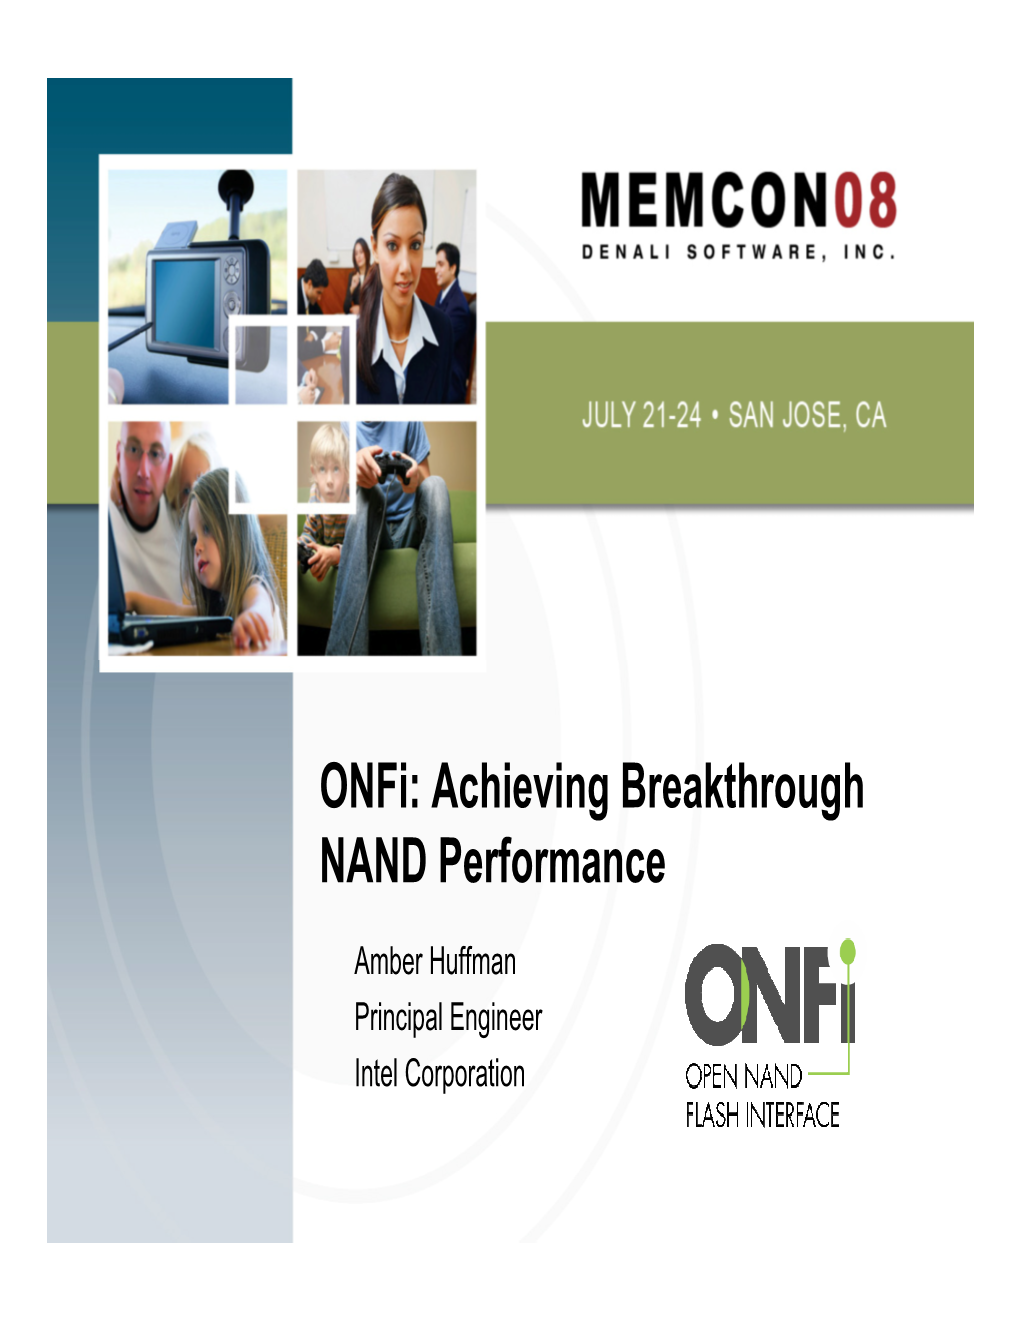 Onfi: Achieving Breakthrough NAND Performance